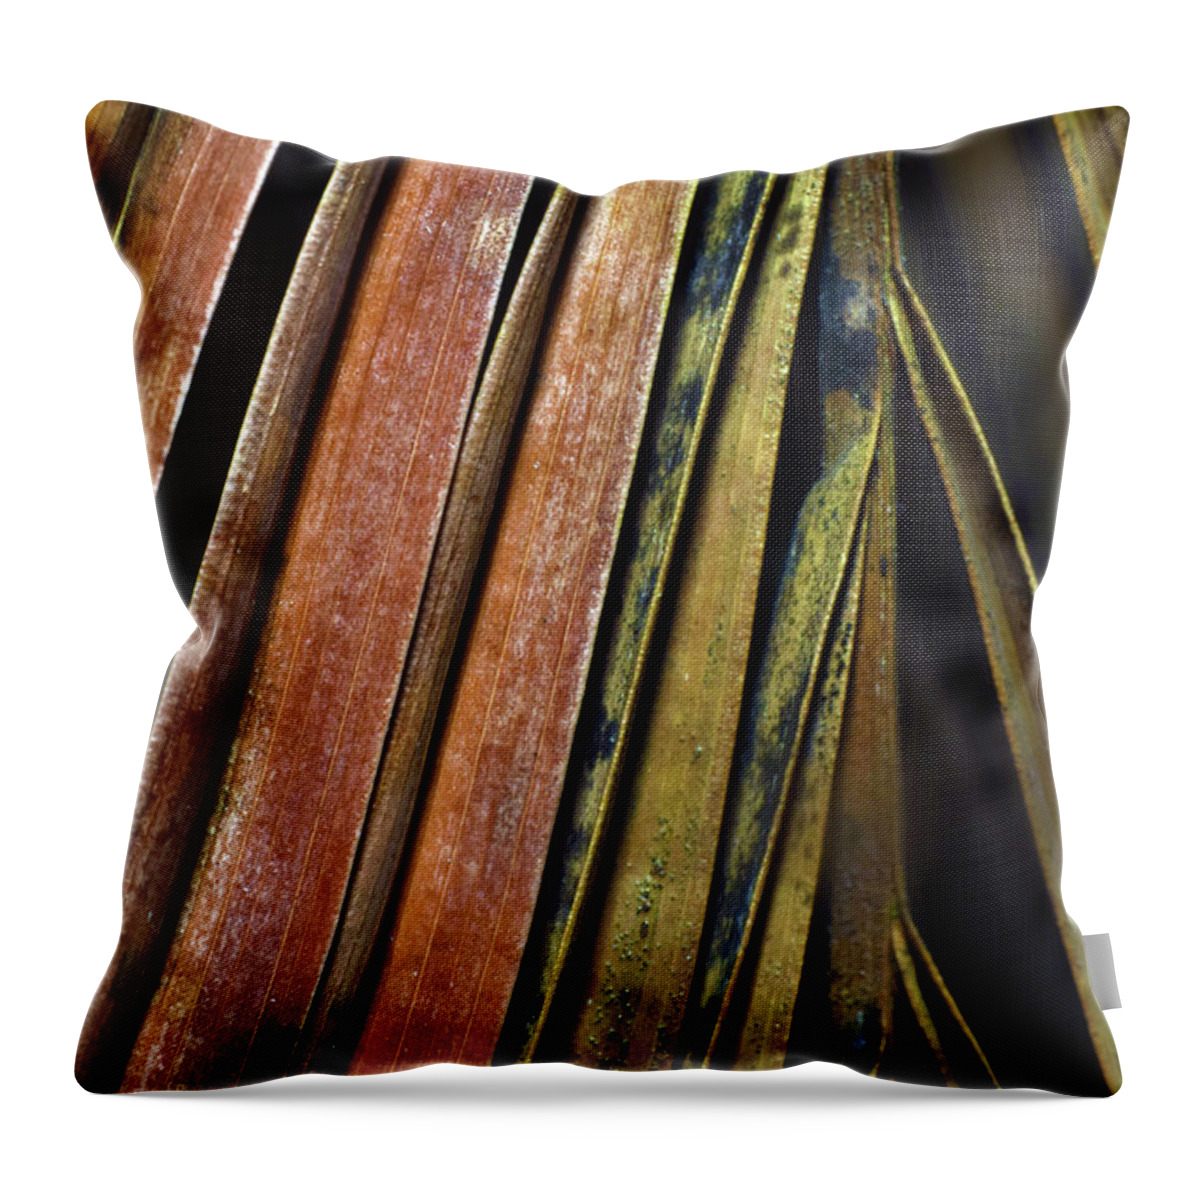 Photograph Throw Pillow featuring the photograph Abstract Palm Frond by Larah McElroy